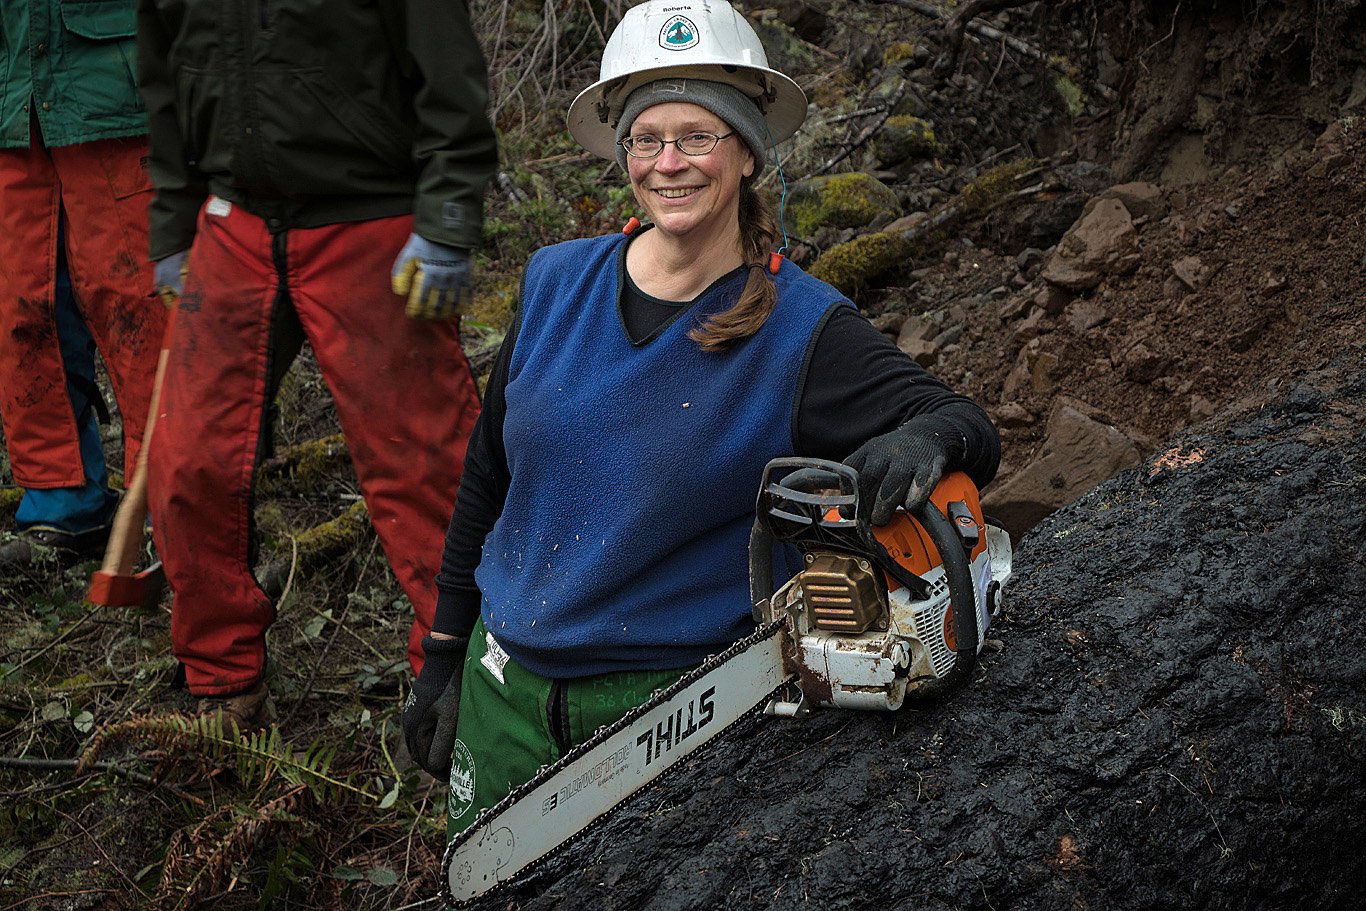 Roberta Cobb helped lead the passionate and skilled volunteers of the PCTA Mt. Hood Chapter to quickly reopen the PCT and other trails. Photo by Terry Hill